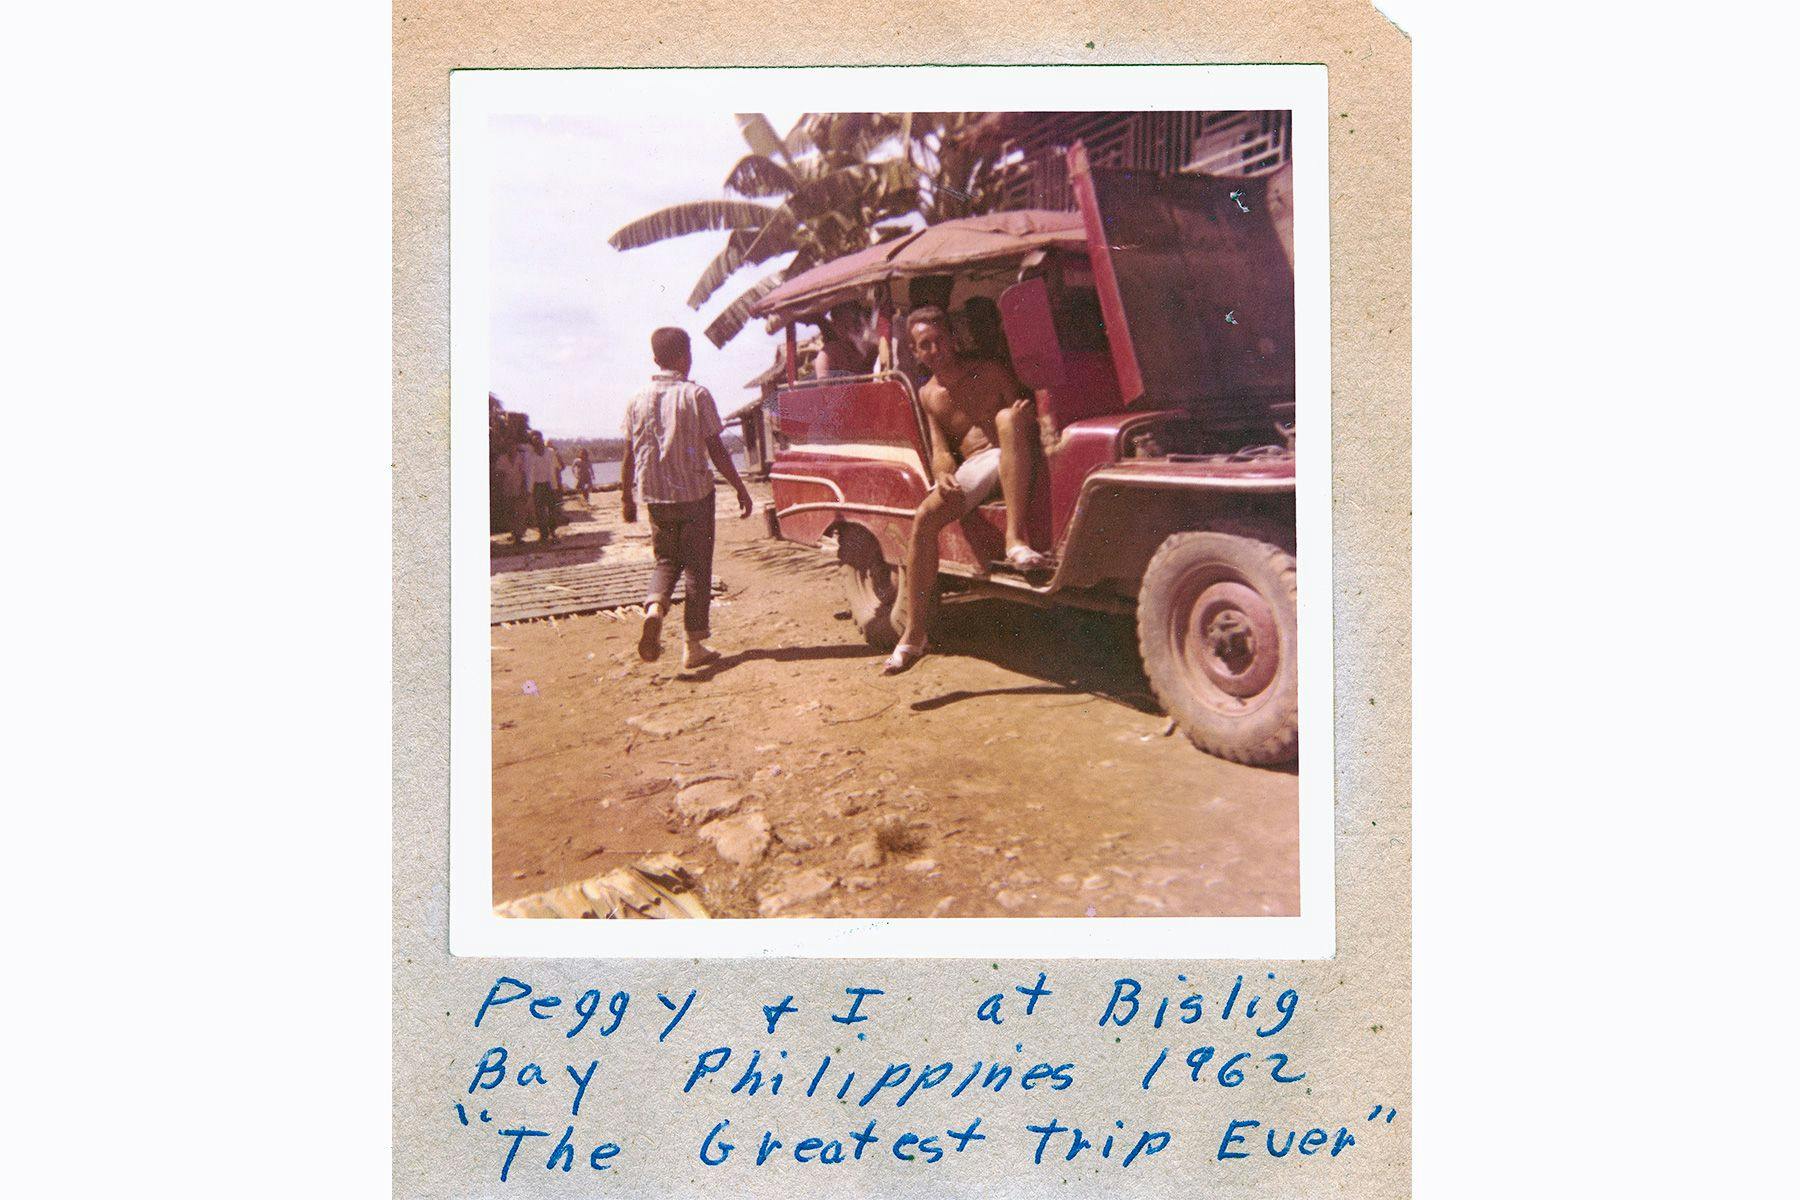 polaroid from dick metz archives1962 philippines